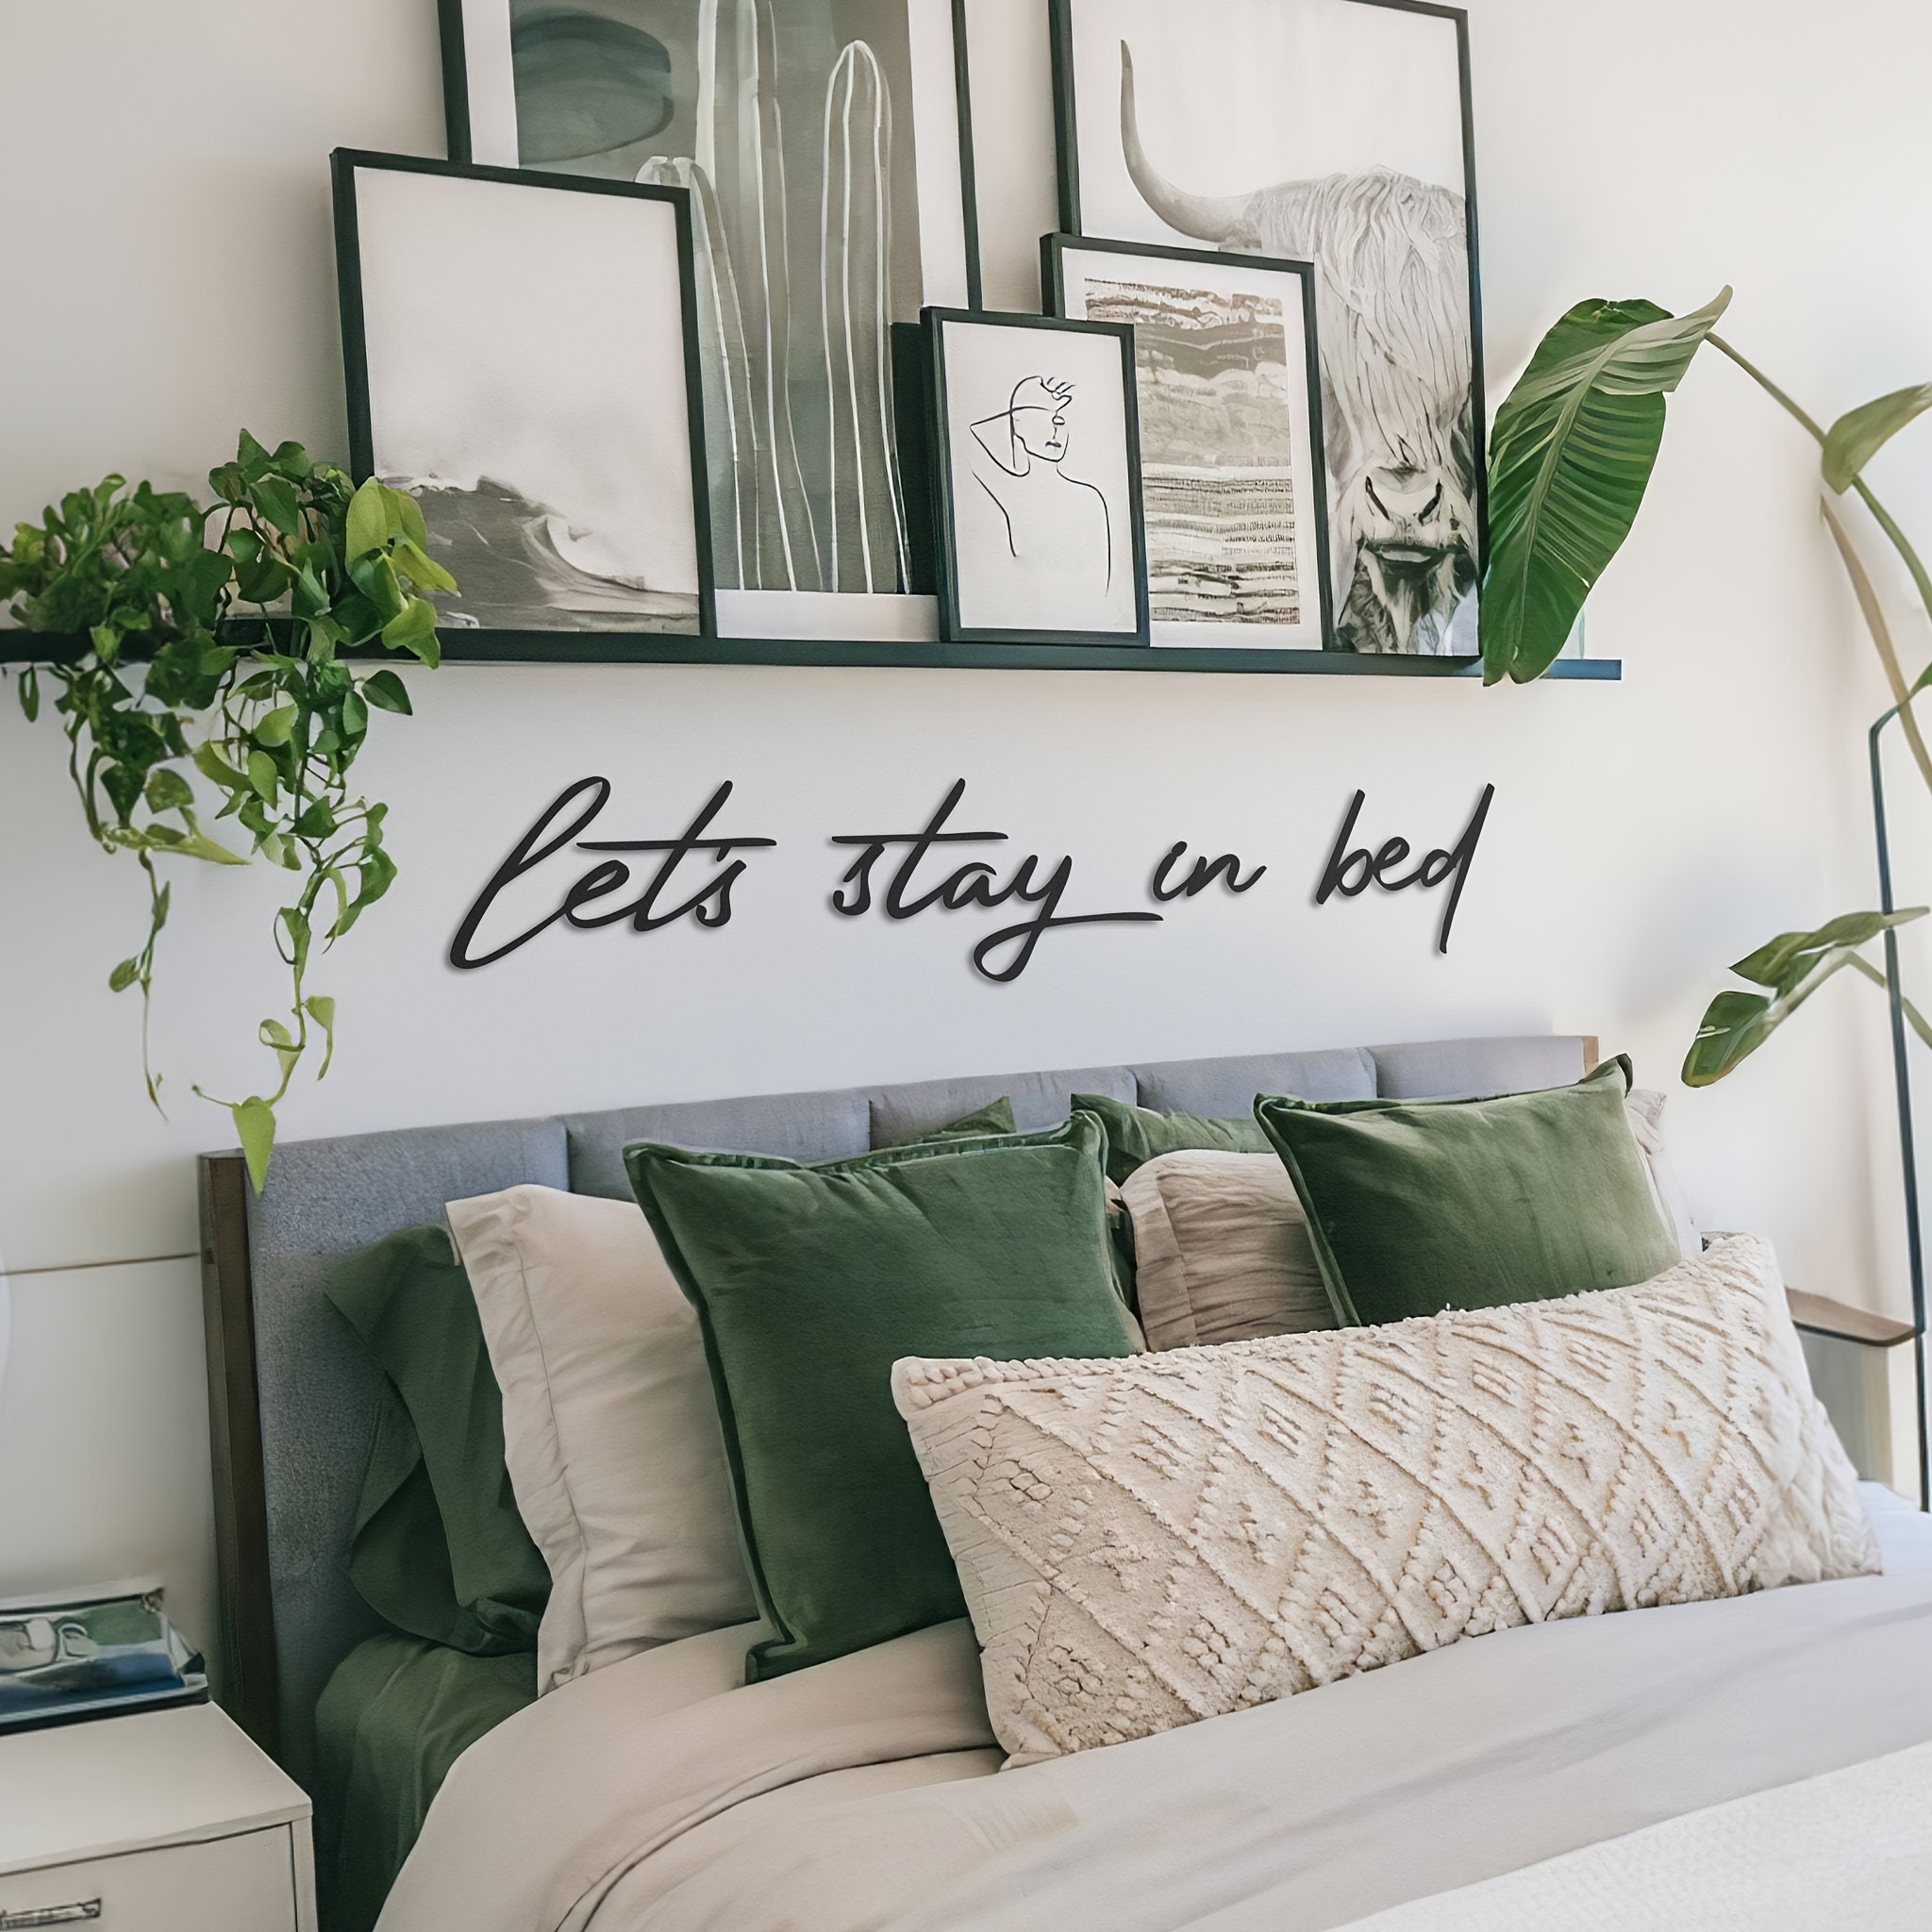 

Let's Stay In Bed, Metal Sign, Metal Wall Decoration, Metal Art, Wall Hangings, Quote Wall Art, Metal Sign, Wall Sign, Housewarming Gift